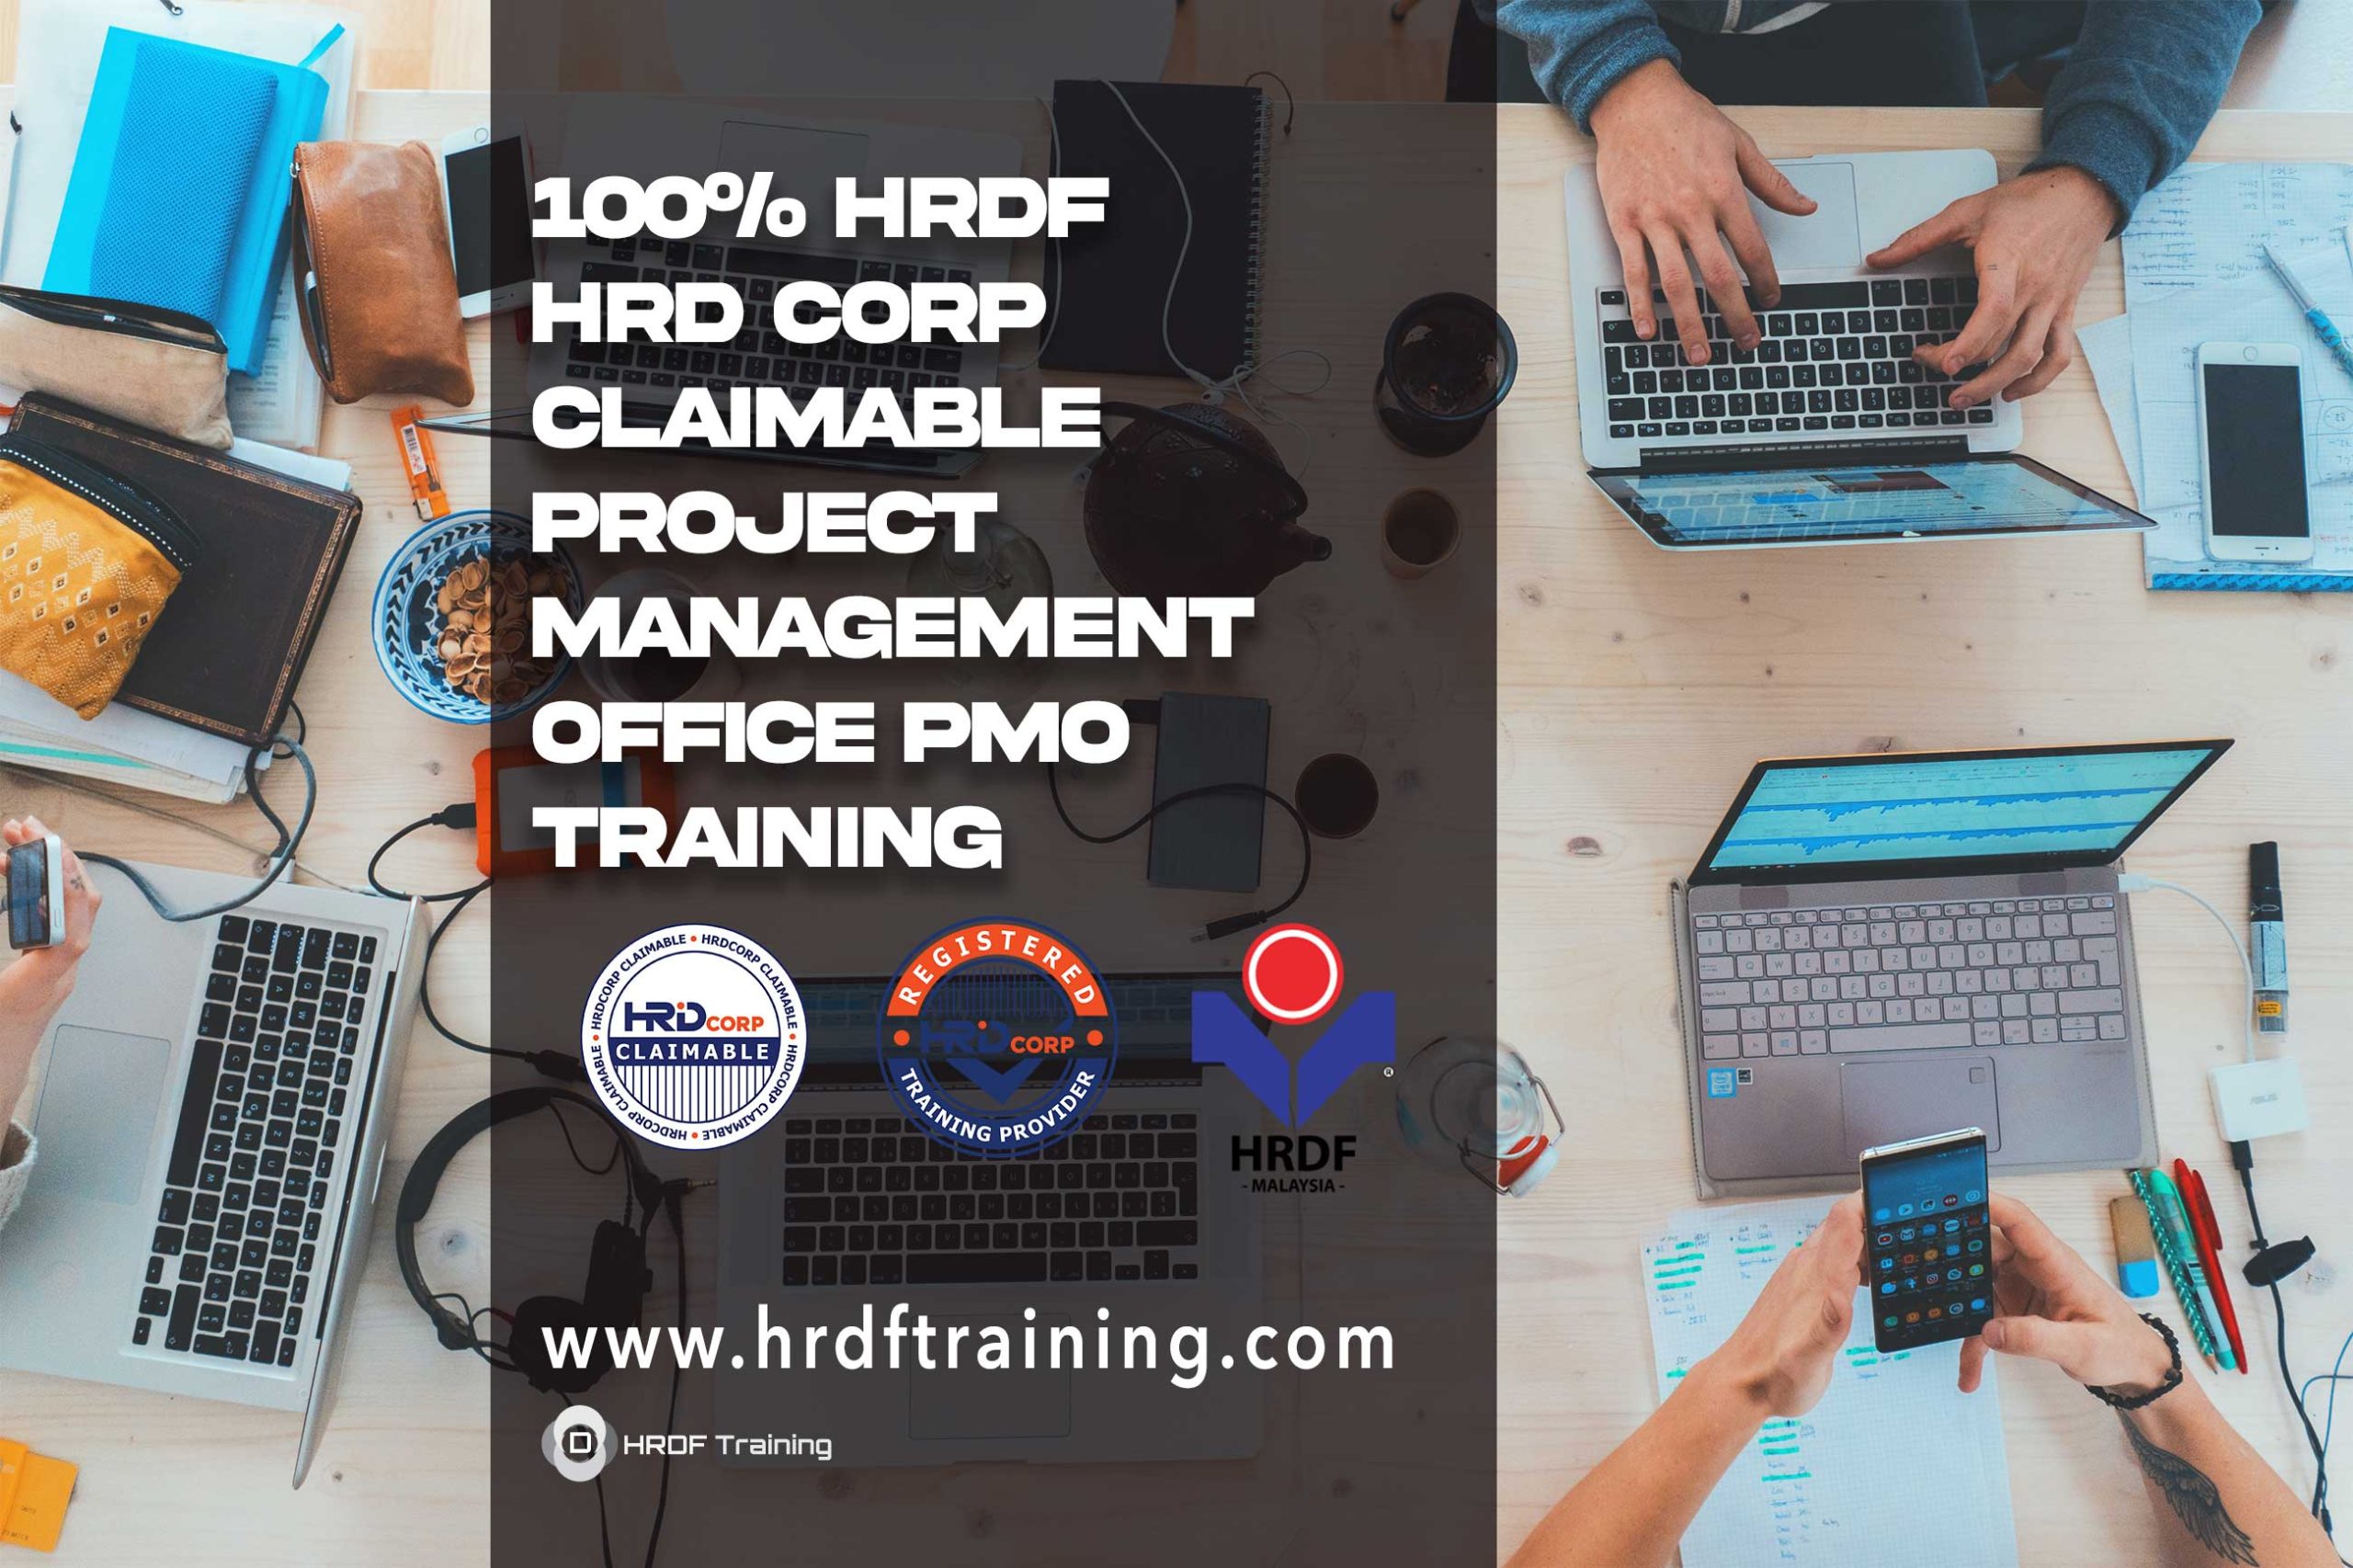 HRDF-HRD-Corp-Claimable-Project-Management-Office-PMO-Training